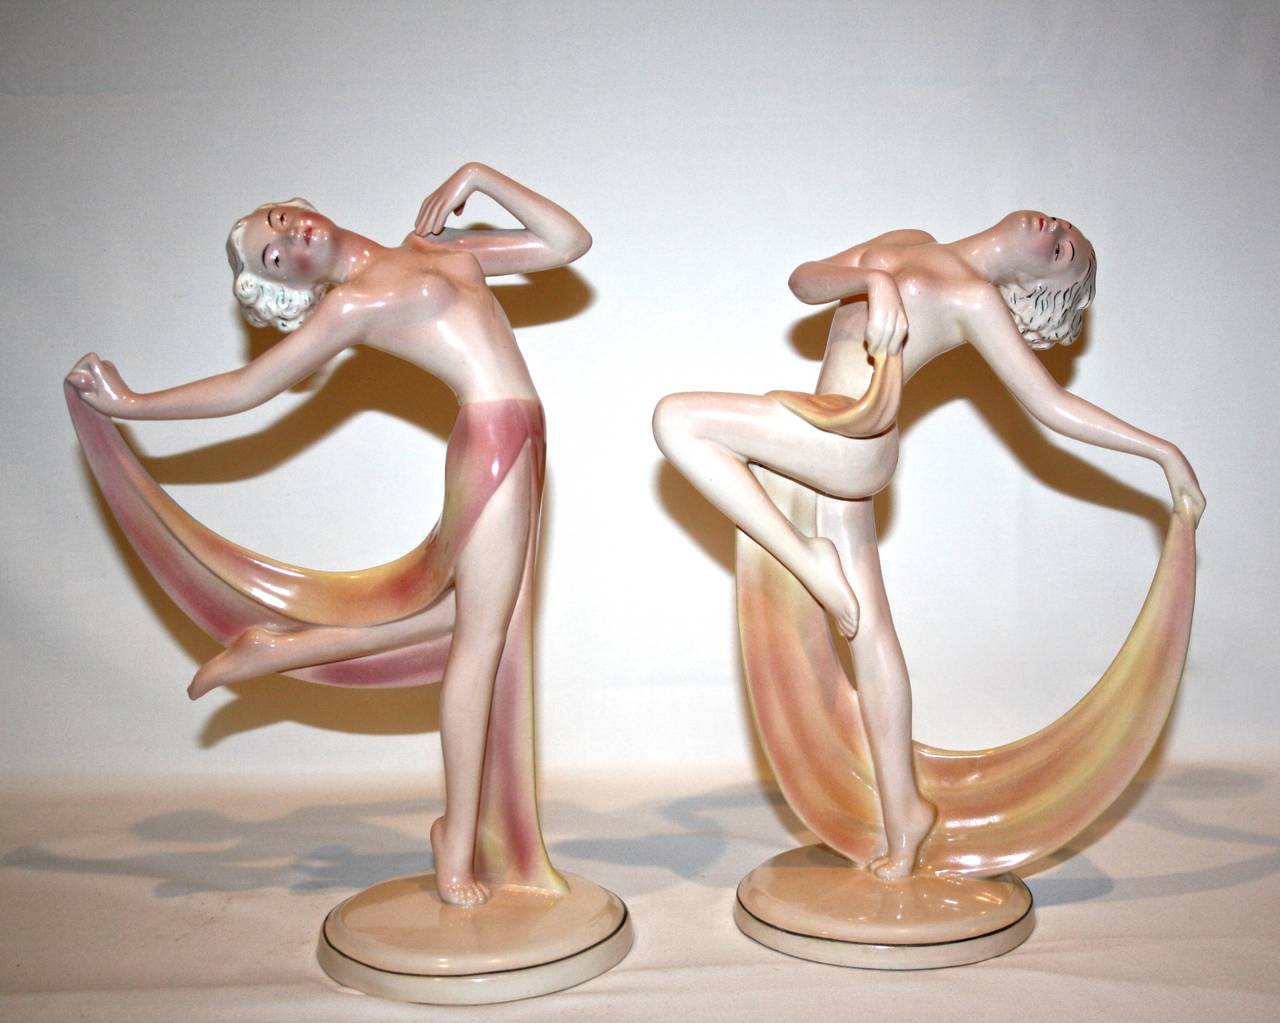 A stunning pair of semi clad nude scarf dancers - dramatic posers .
Made in the early 1930s by the firm Hertwig and Katzhutte Germany.
These models have been attributed to sculptor Josef Lorenzl.
The pair present in wonderful condition a mixture